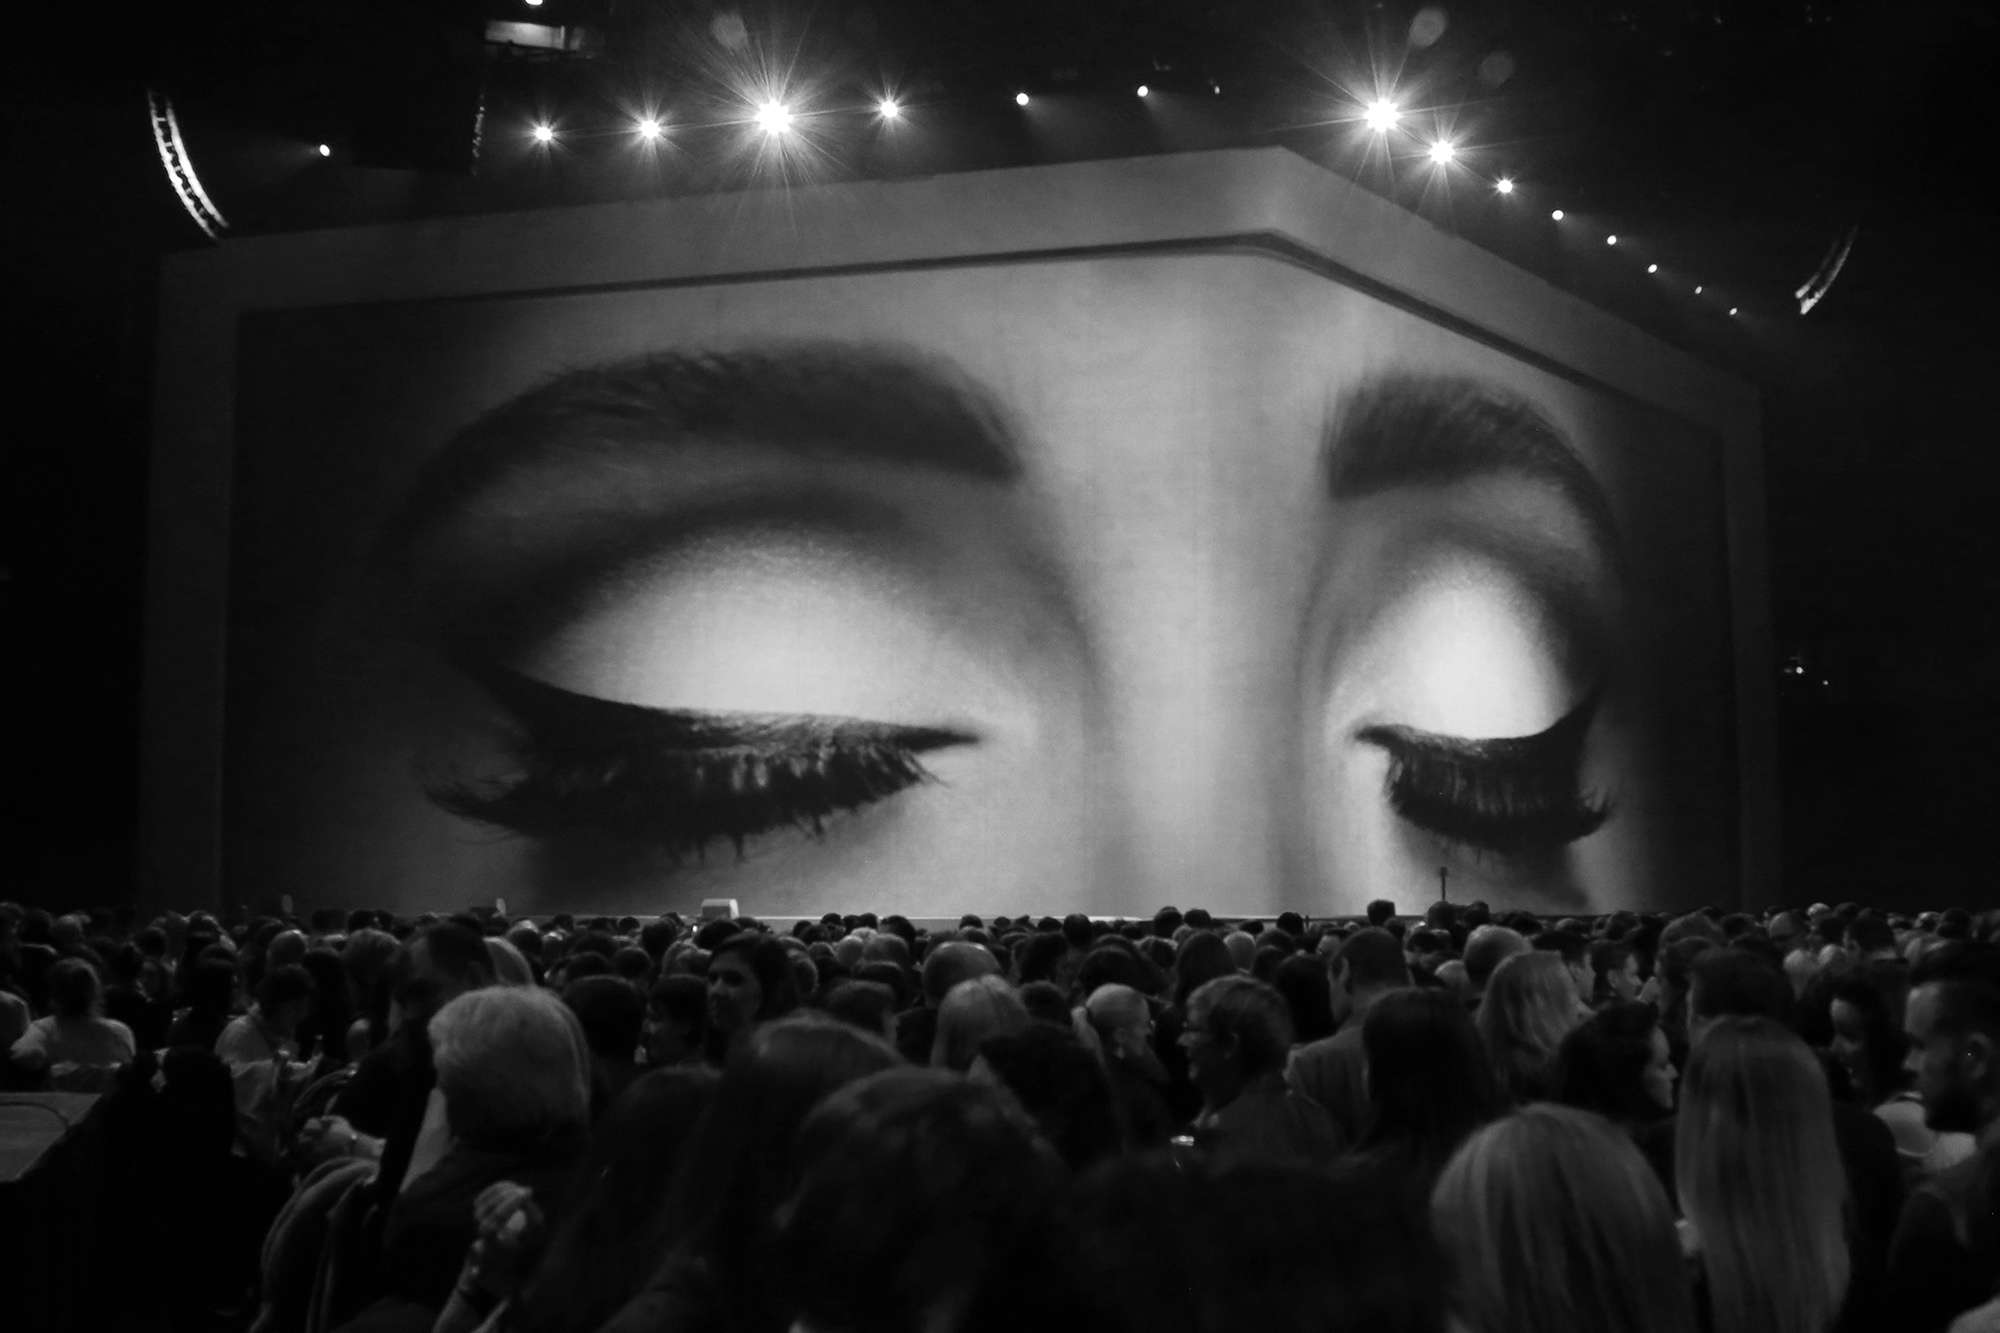 Es Devlin, the stage designer for Adele and the Olympics, on her new Gucci  show